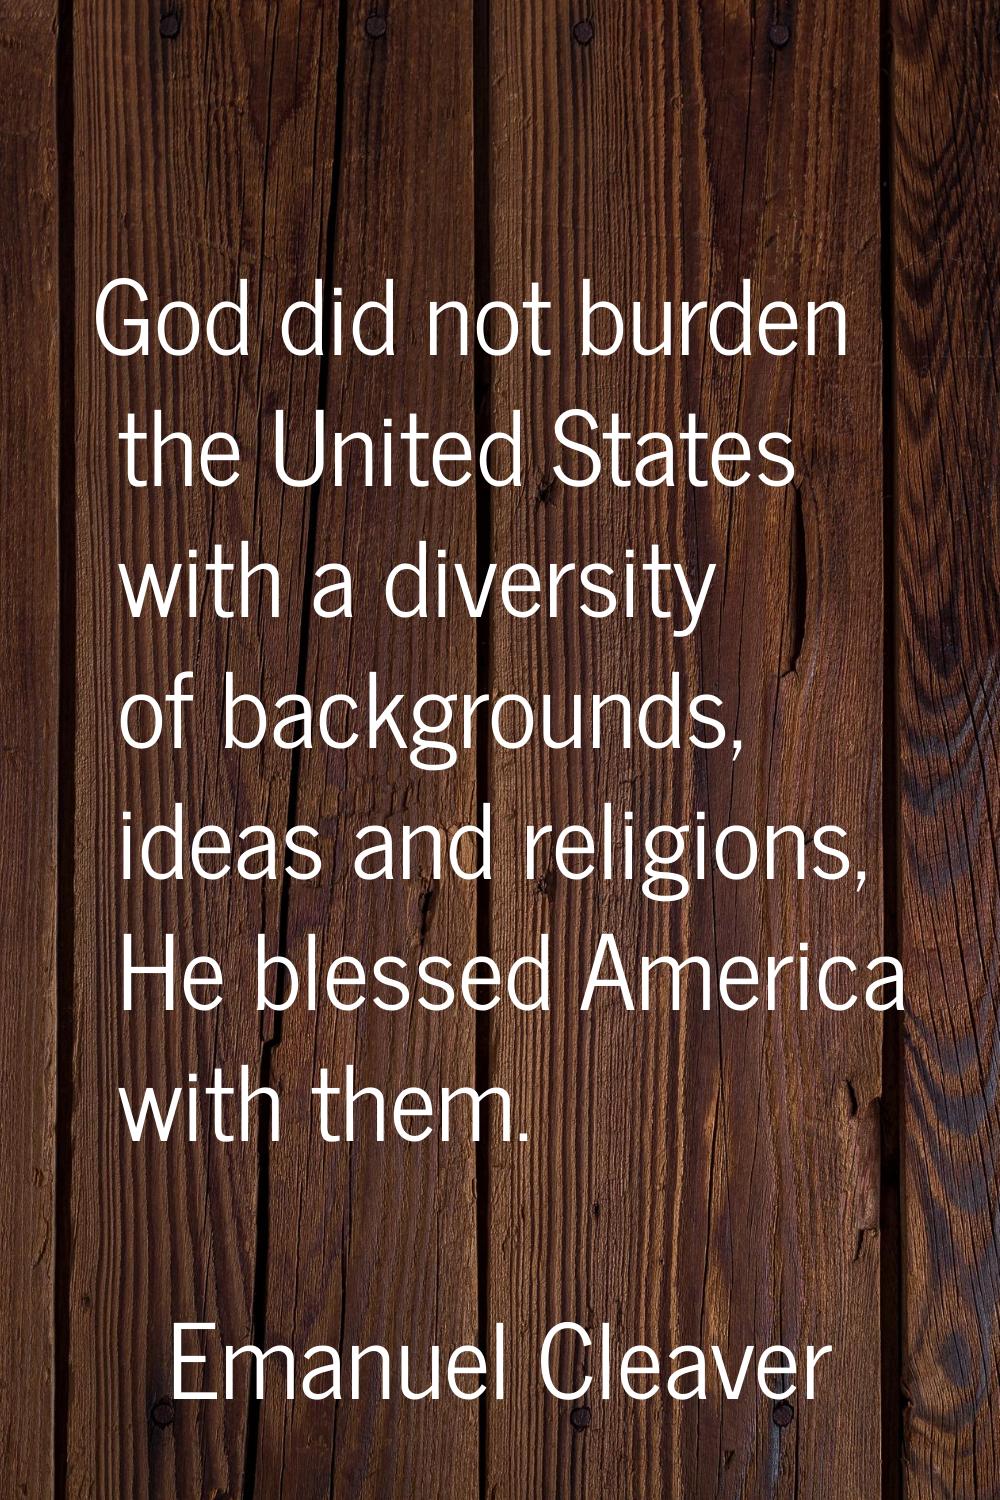 God did not burden the United States with a diversity of backgrounds, ideas and religions, He bless